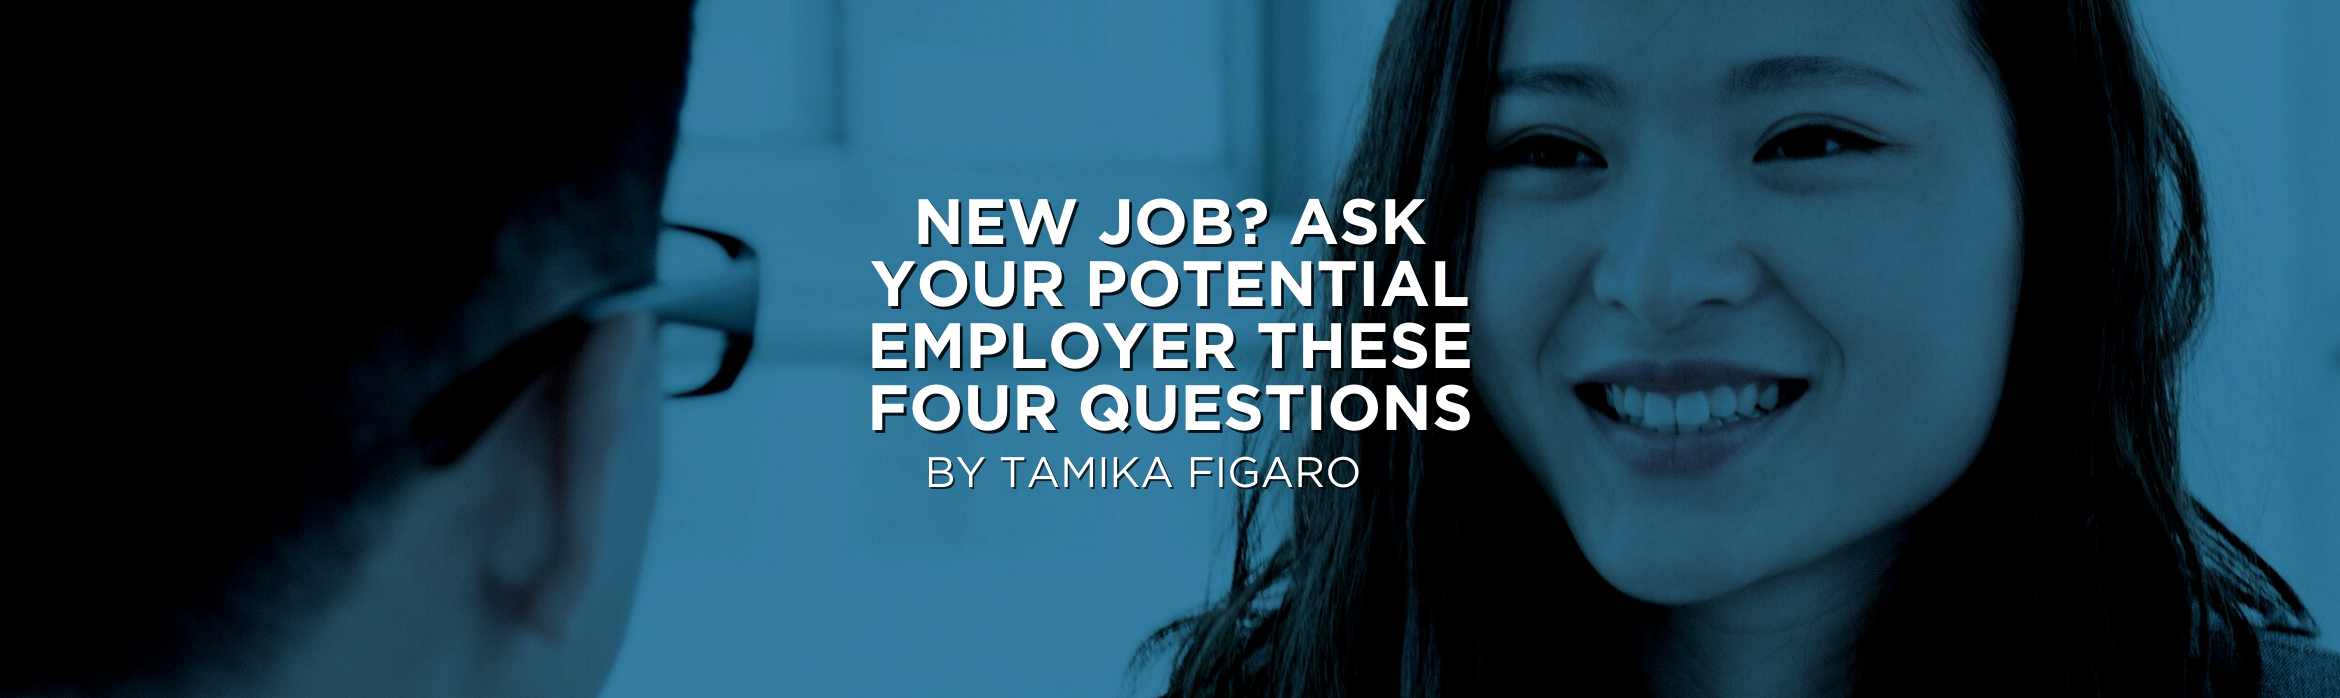 New Job? Ask Your Potential Employer These Four Questions